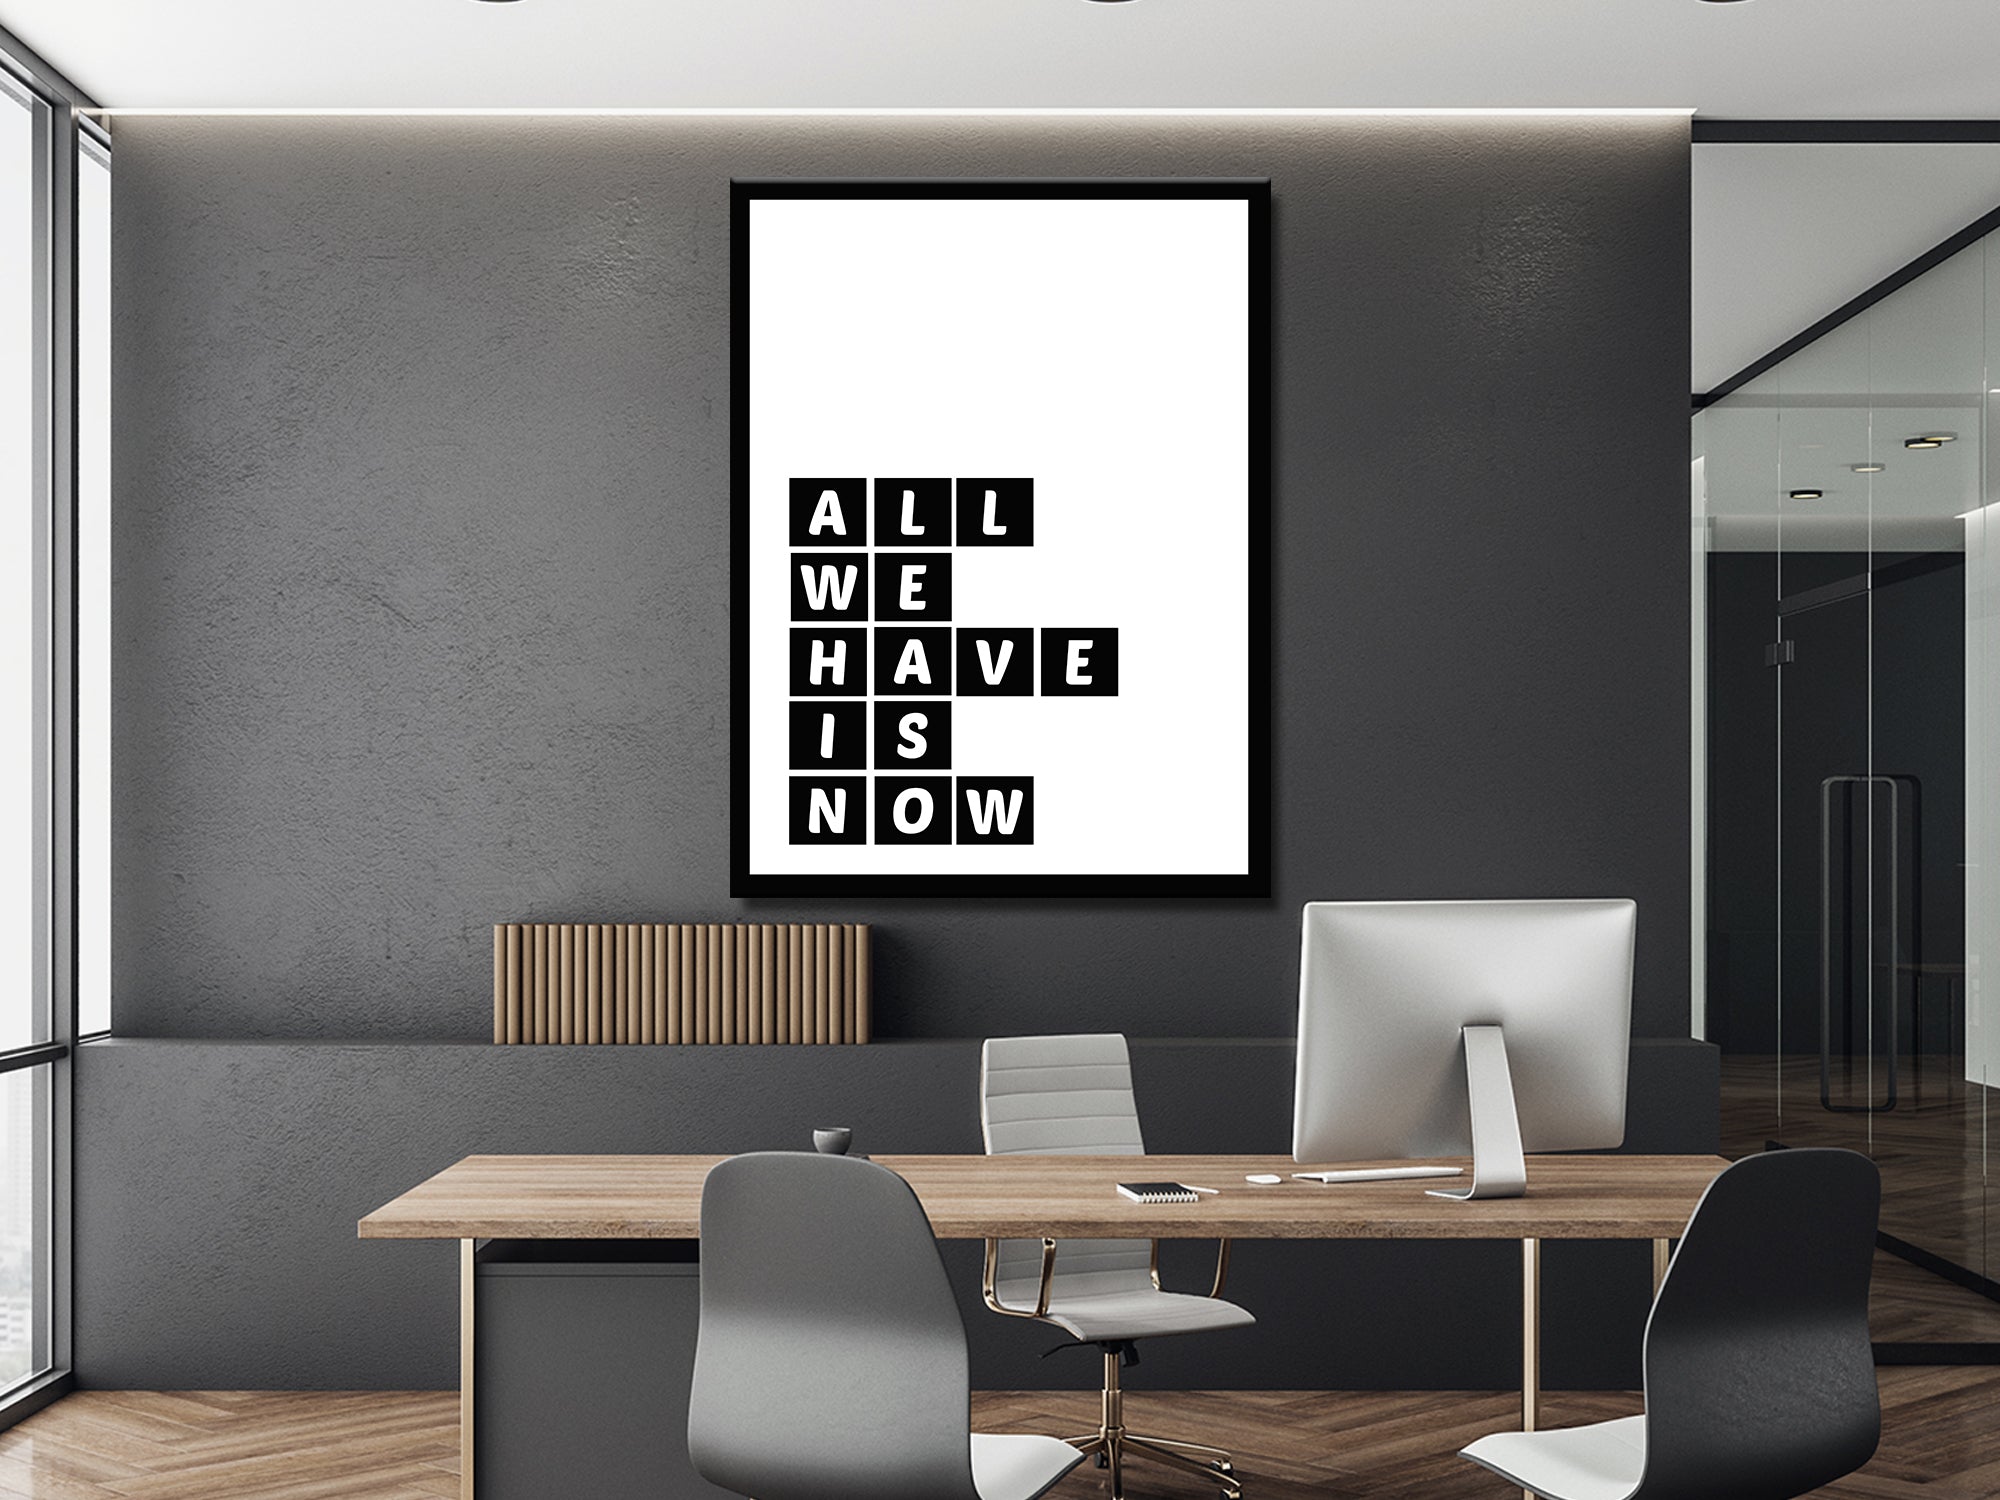 All We Have Is Now V2 - Canvas Wall Art